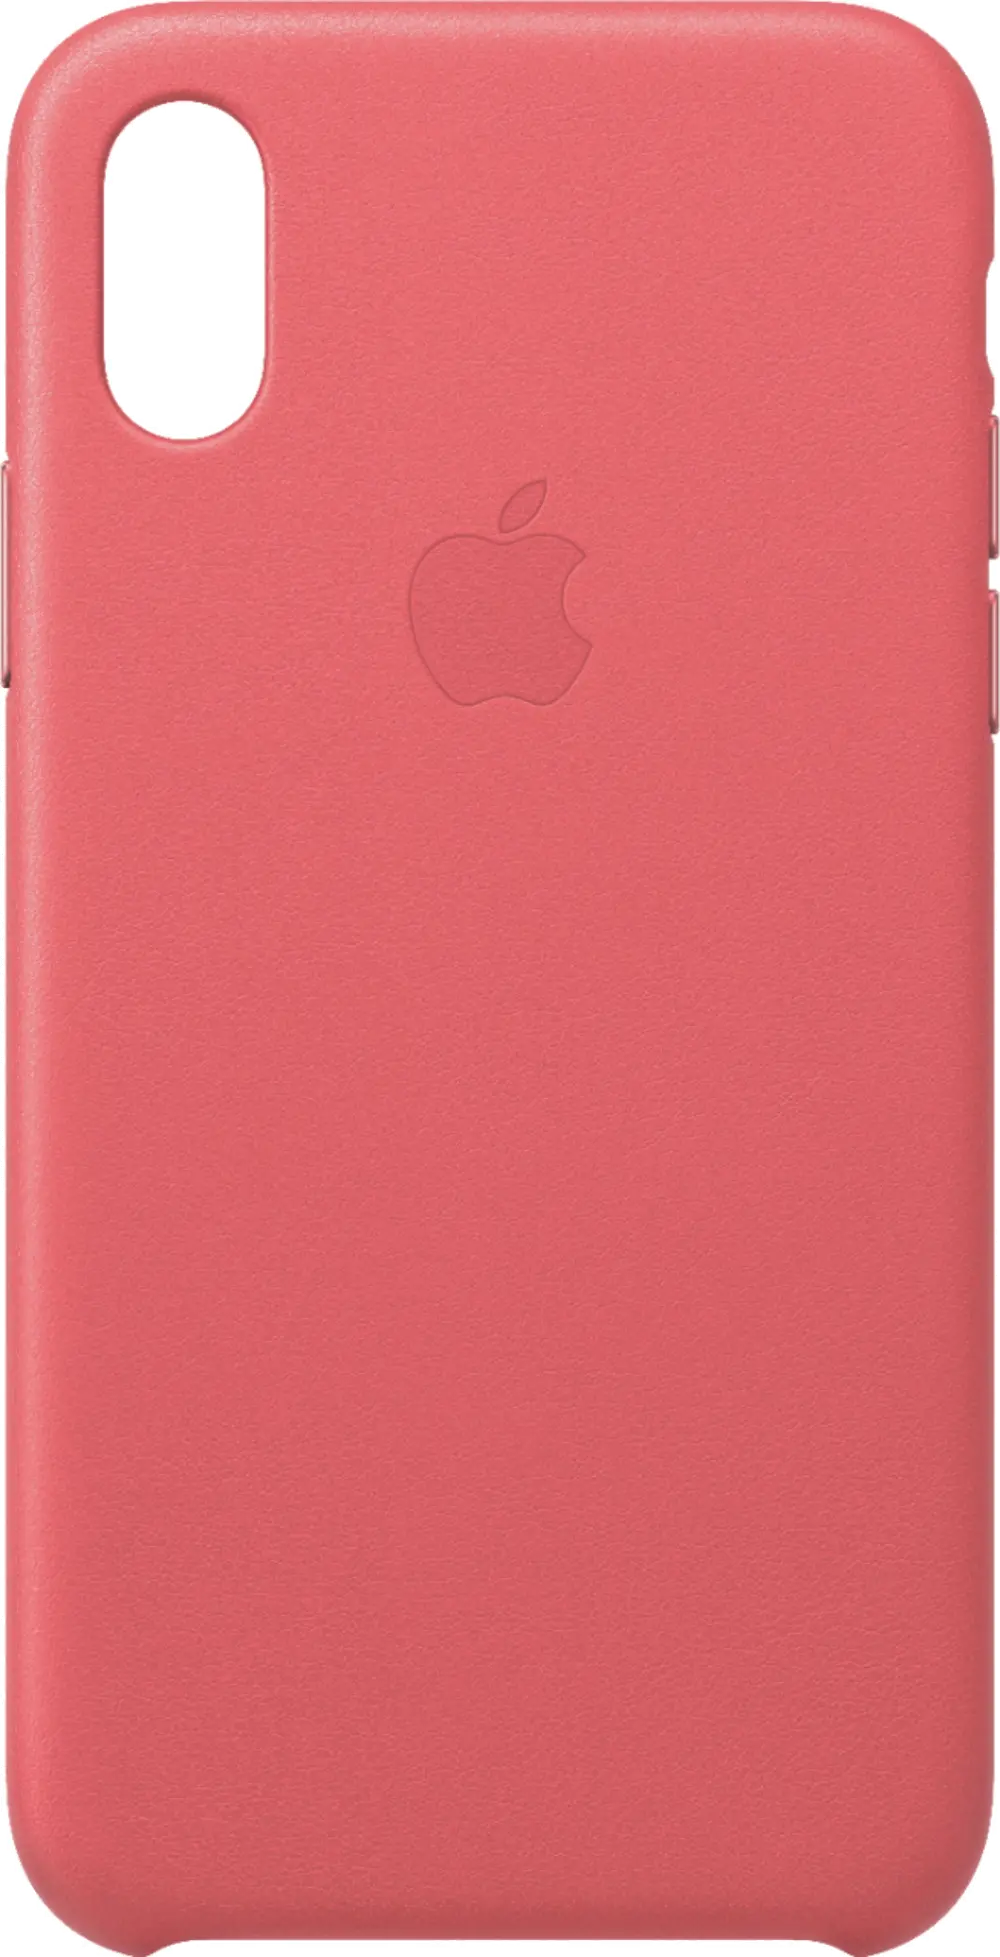 MTEU2ZM/A,XS,CASE Apple iPhone XS Leather Case - Peony Pink-1